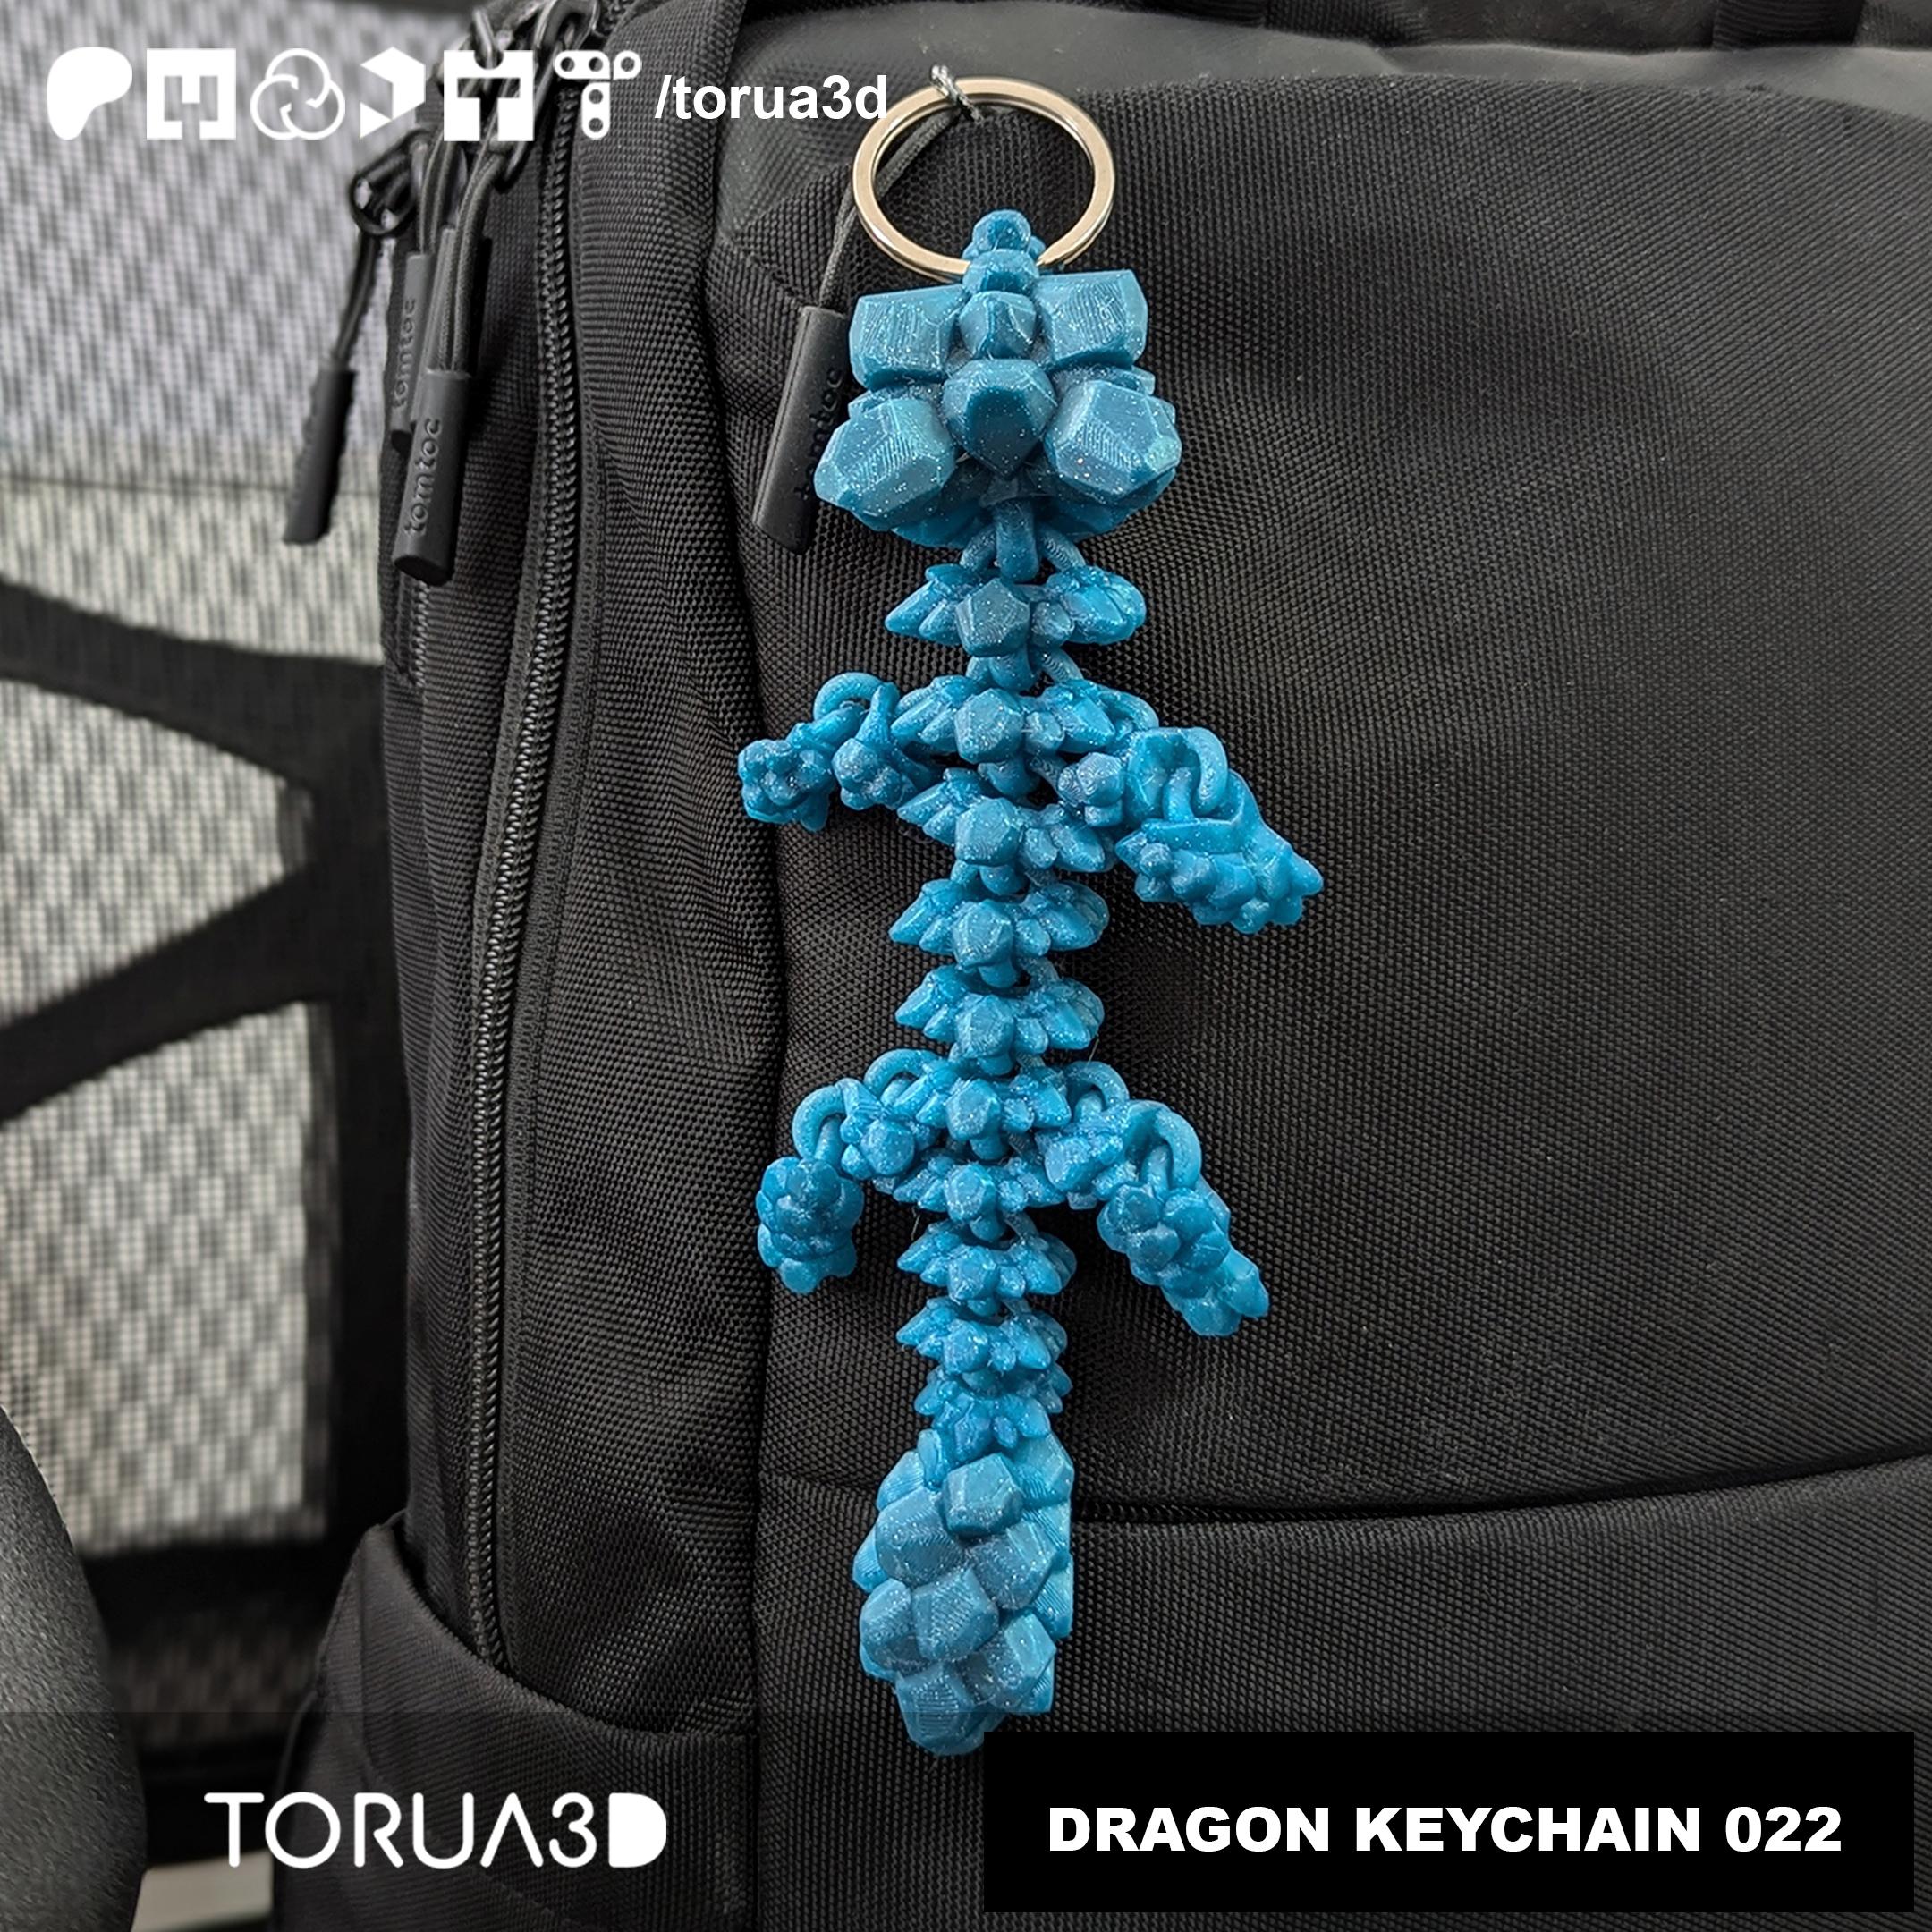 Articulated Dragon 022 Keychain - Print in place - No supports - STL 3d model